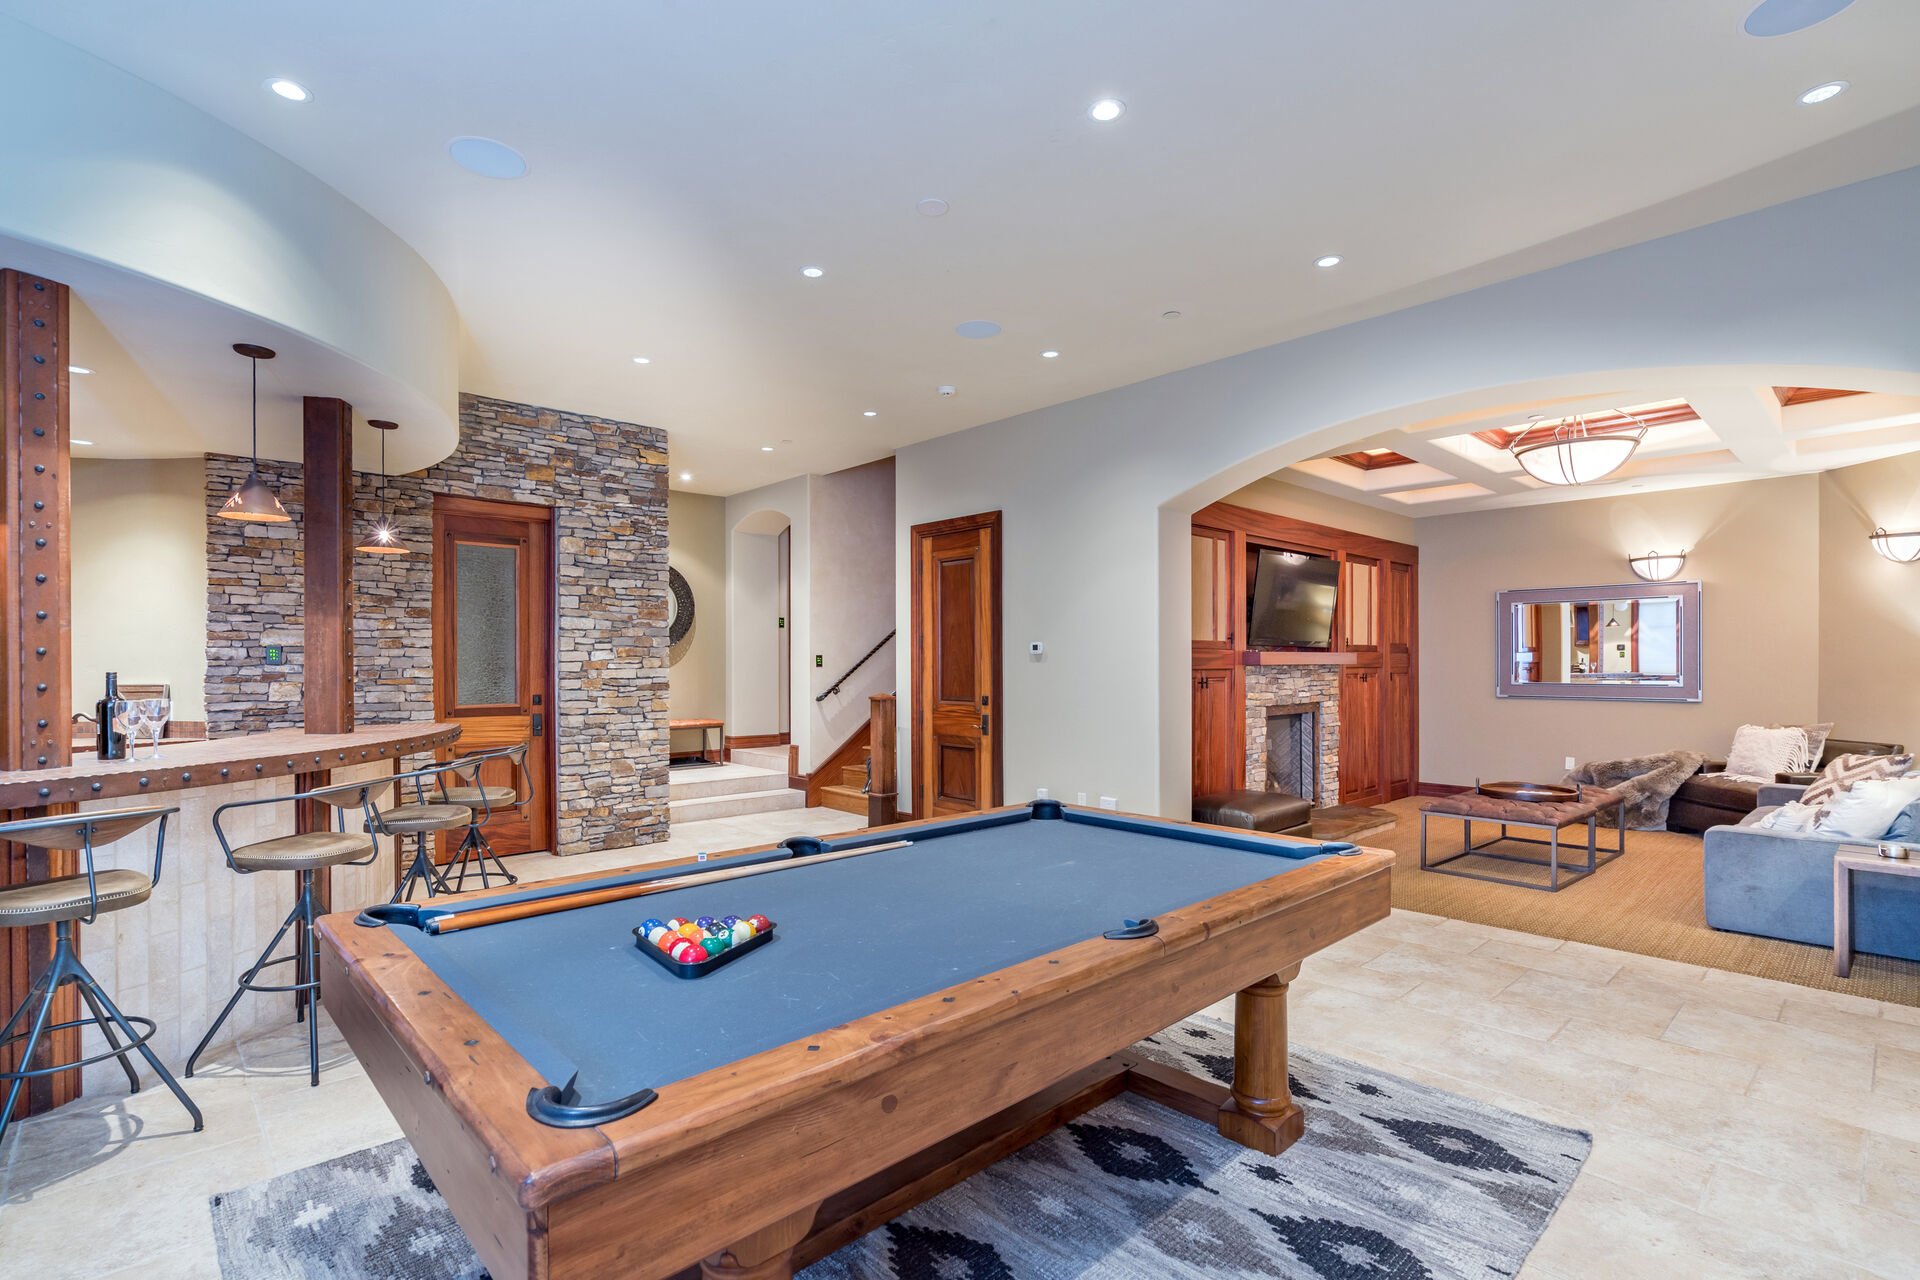 The downstairs entertainment area includes a pool table